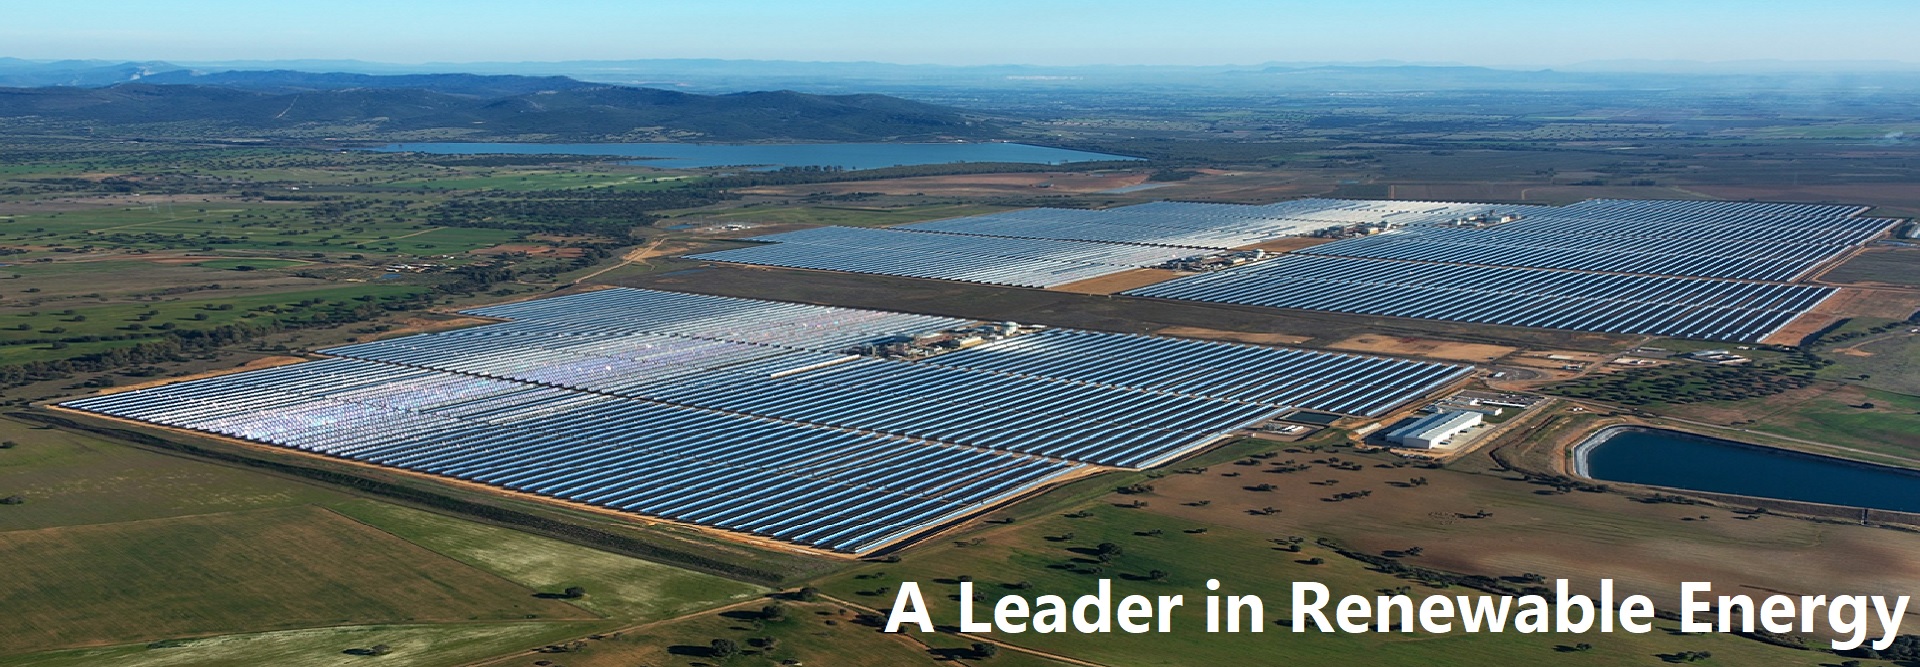 A Leader in Renewable Energy